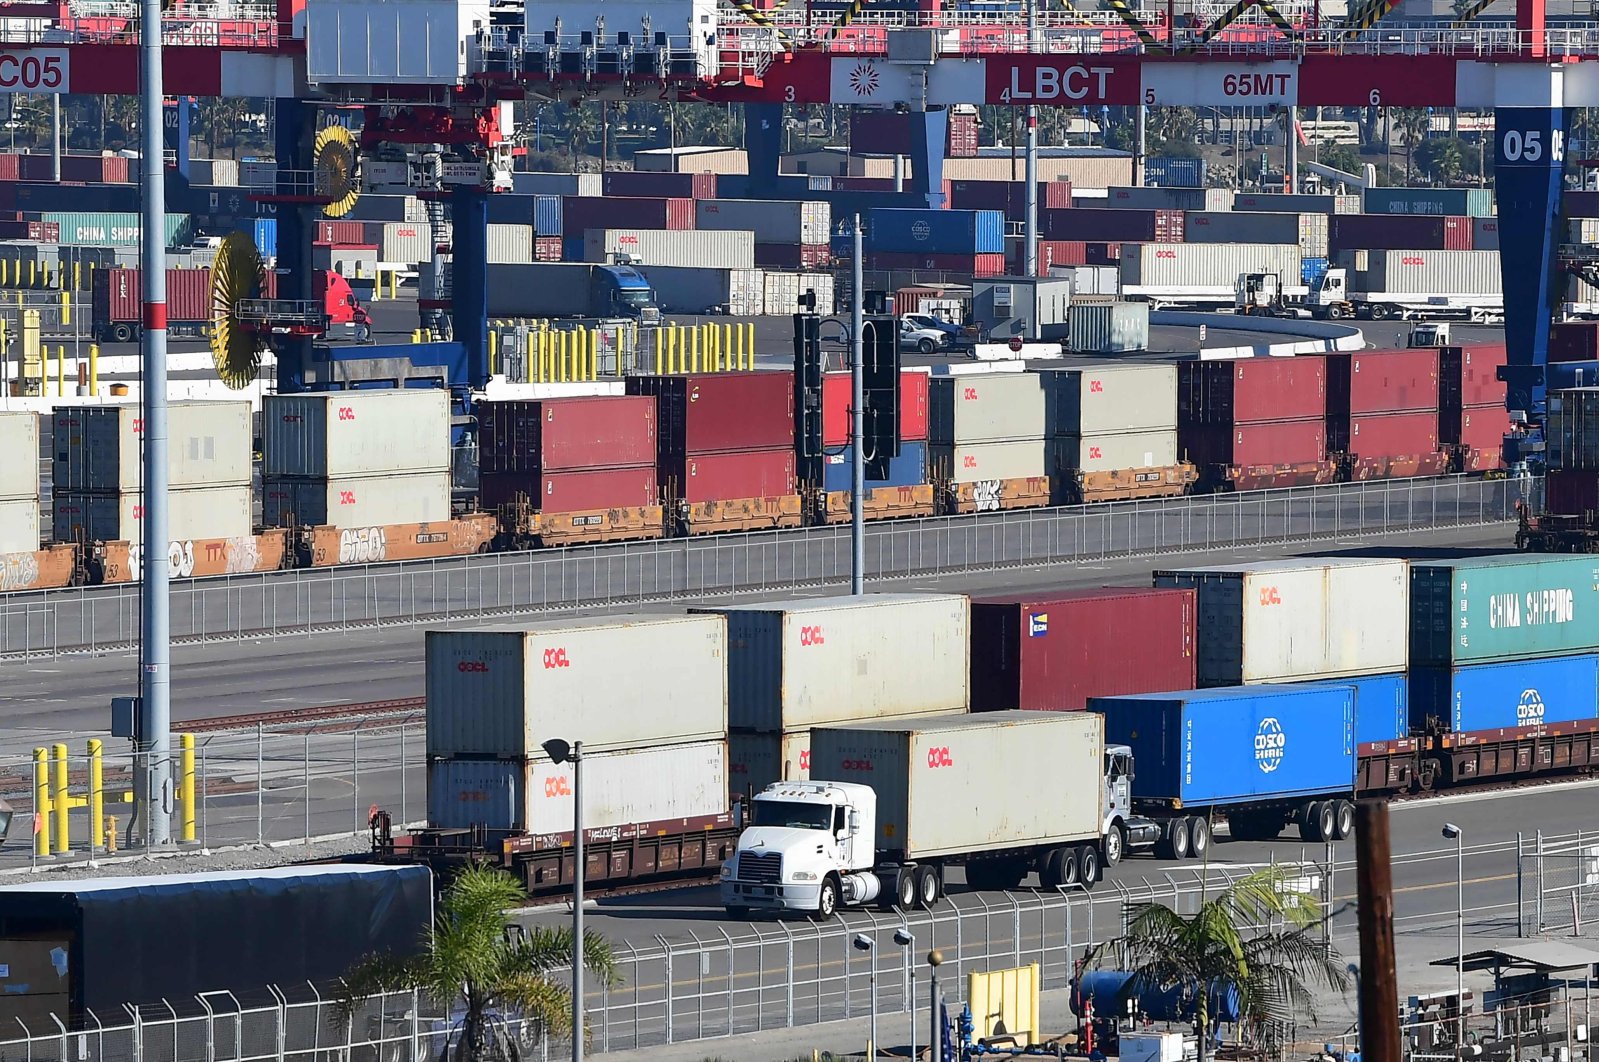 A container truck makes its way past a row of containers stacked at the Port of Long Beach, California, U.S., Nov. 12, 2021. (AFP Photo)